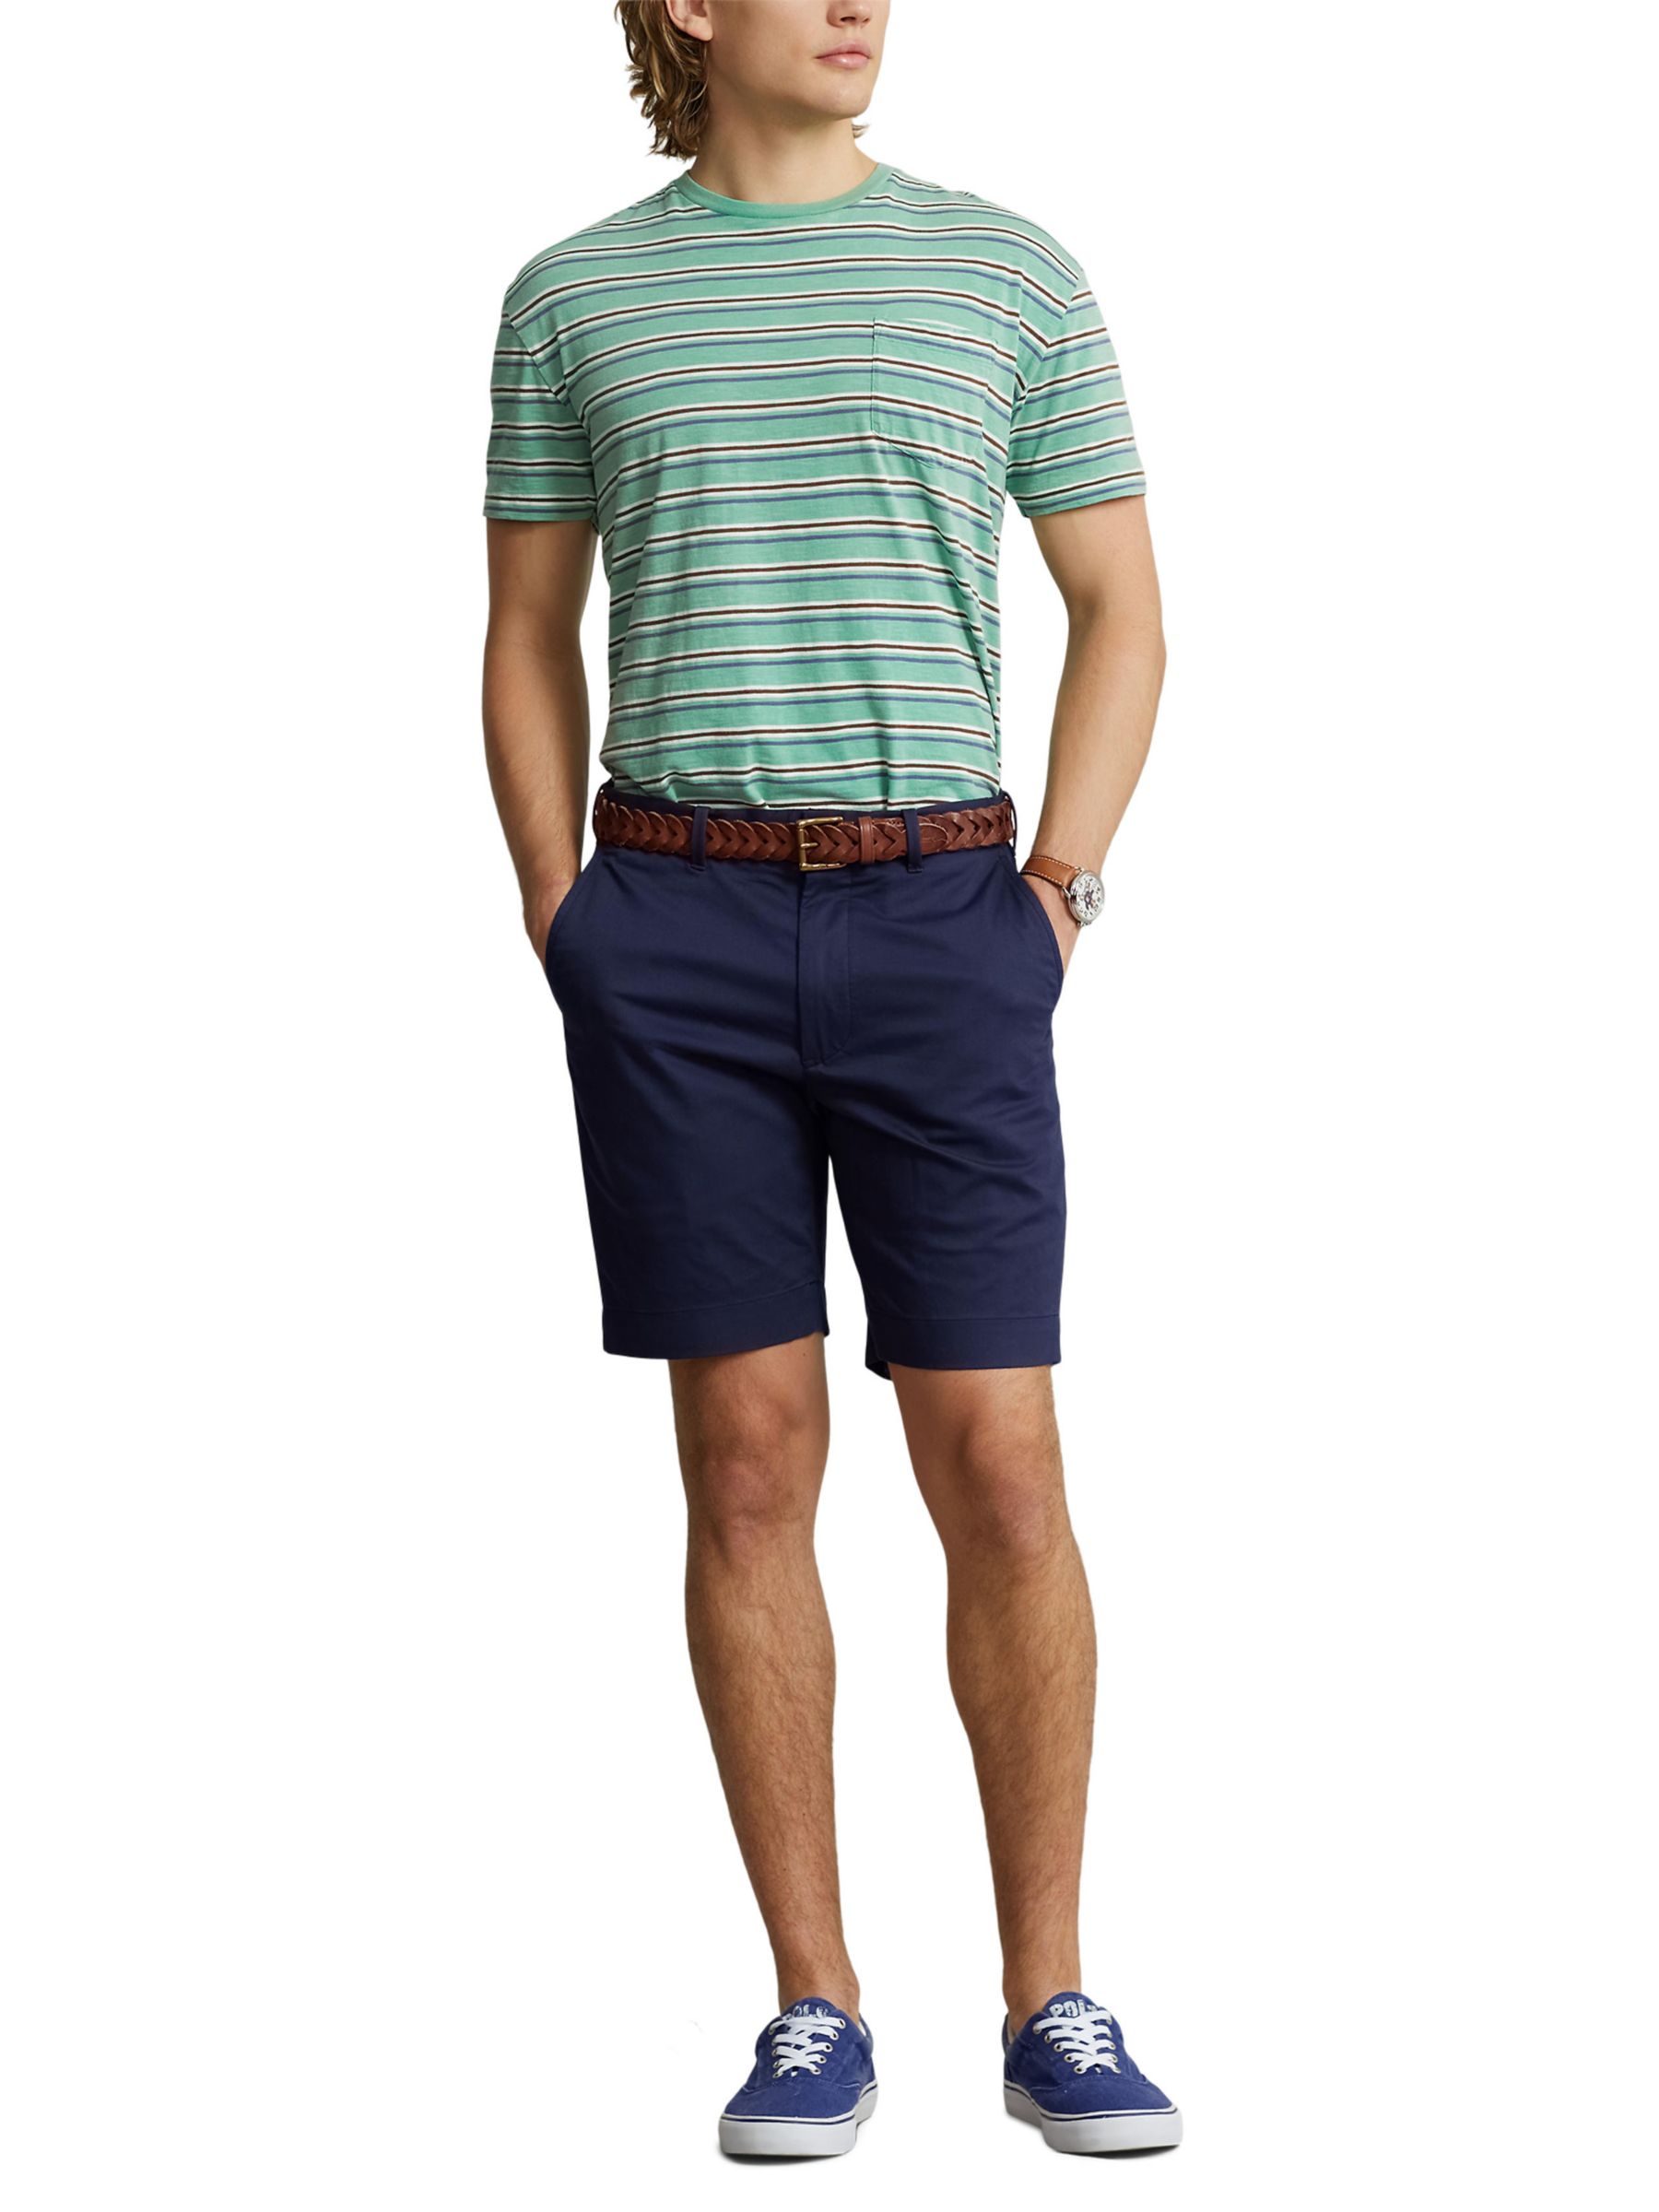 Polo Ralph Lauren Golf Shorts, French Navy at John Lewis & Partners